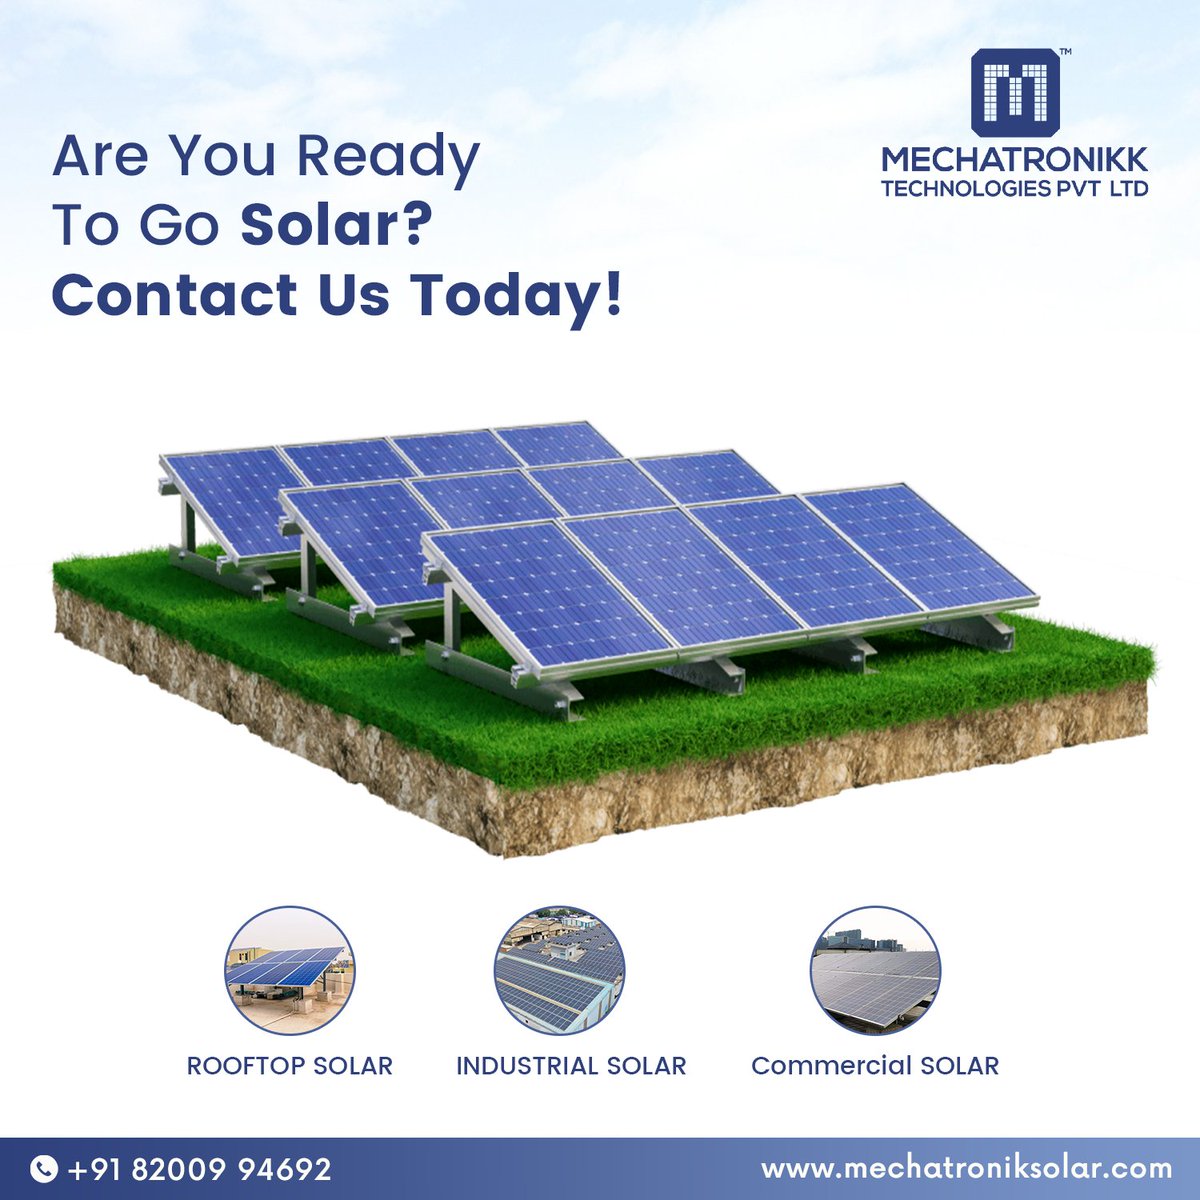 Are You Ready To Go Solar?
Join the renewable energy revolution and power your home with the sun!

Solar Inquiry Call:
📲 +91 82009 94692
📲 +91 81604 00549

#SolarPower #SustainableLiving #GoSolar #LowerBills #ElectricitySavings #mechatronikksolar #Ahmedabad #Gujarat